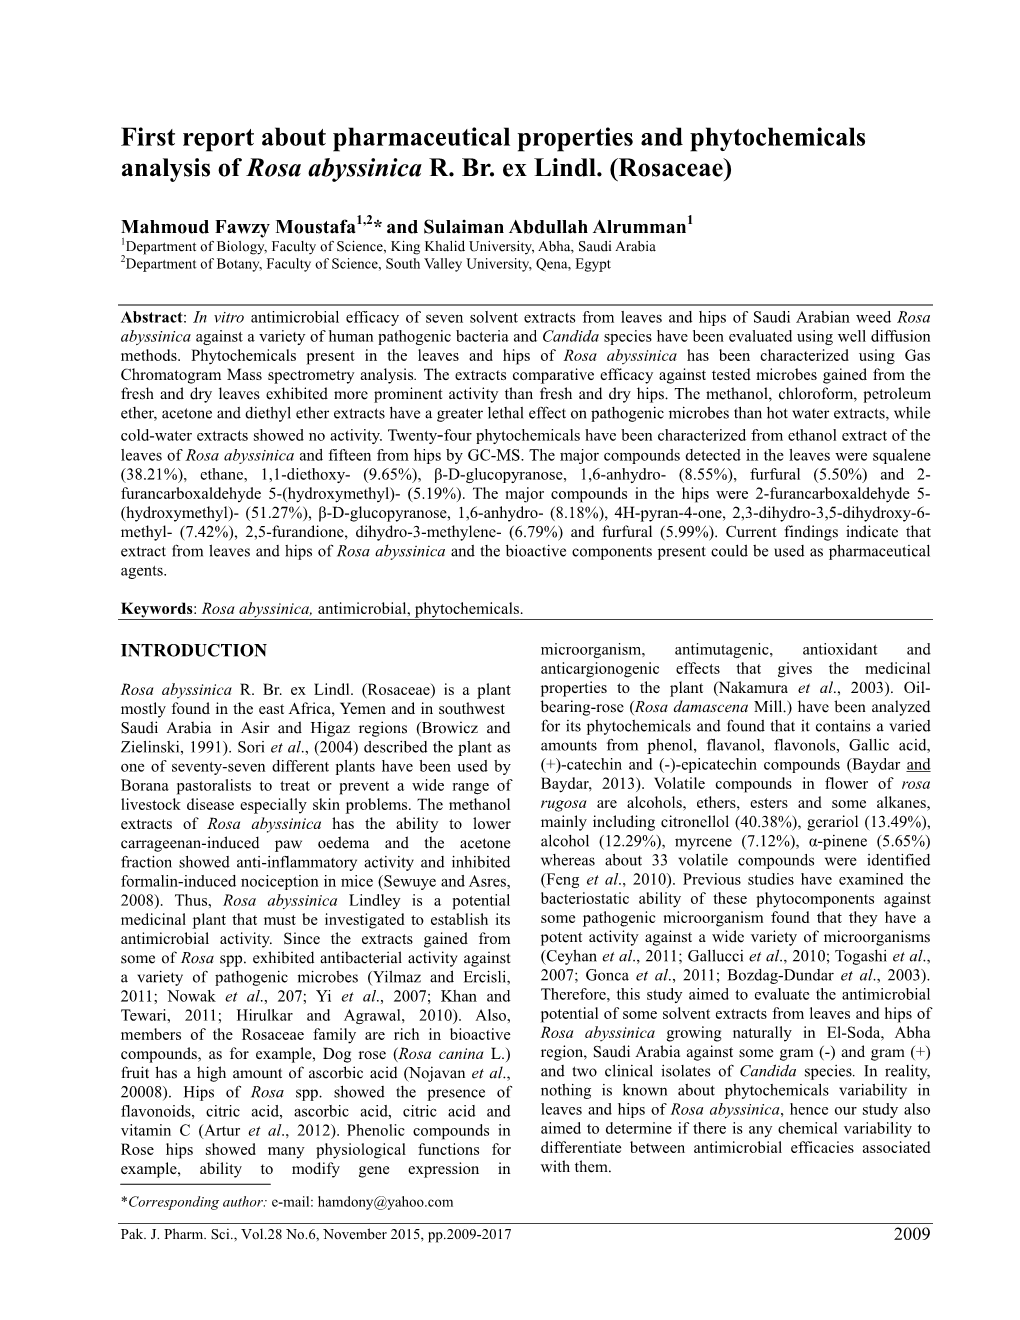 First Report About Pharmaceutical Properties and Phytochemicals Analysis of Rosa Abyssinica R